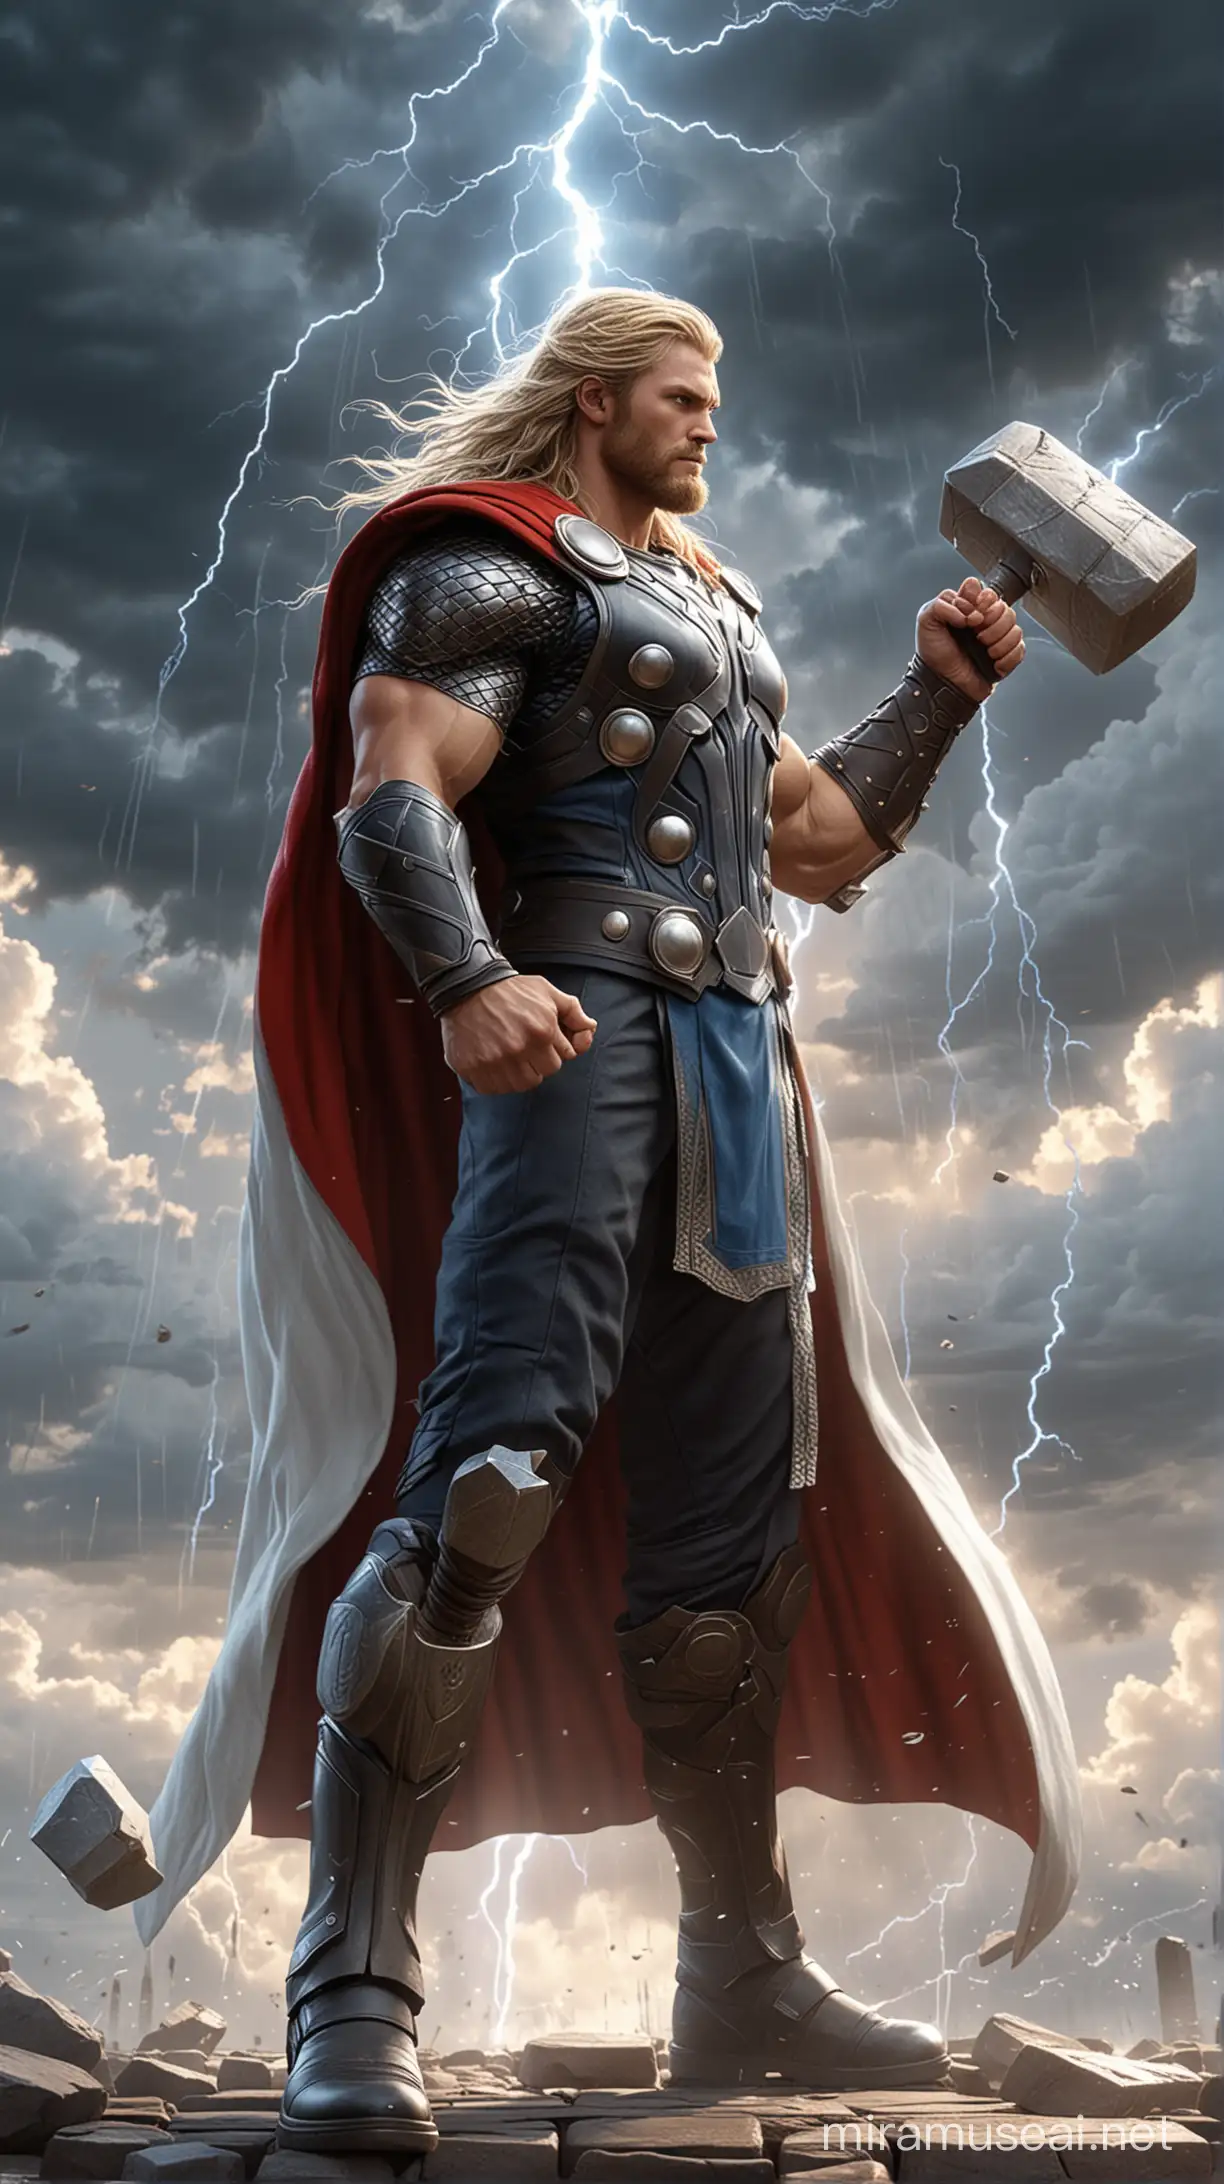 photo of a thor animation style character, holding Thor's hammer. The character is wearing a white t-shirt with the words "thor" and, the character is wearing an open white and white checkered jacket. The character's hair is arranged randomly and appears white. In the background, there are lines of lightning and dynamic clouds around the characters. The weapons held by the characters have intricate designs and emit energy similar to those seen in the backgroun